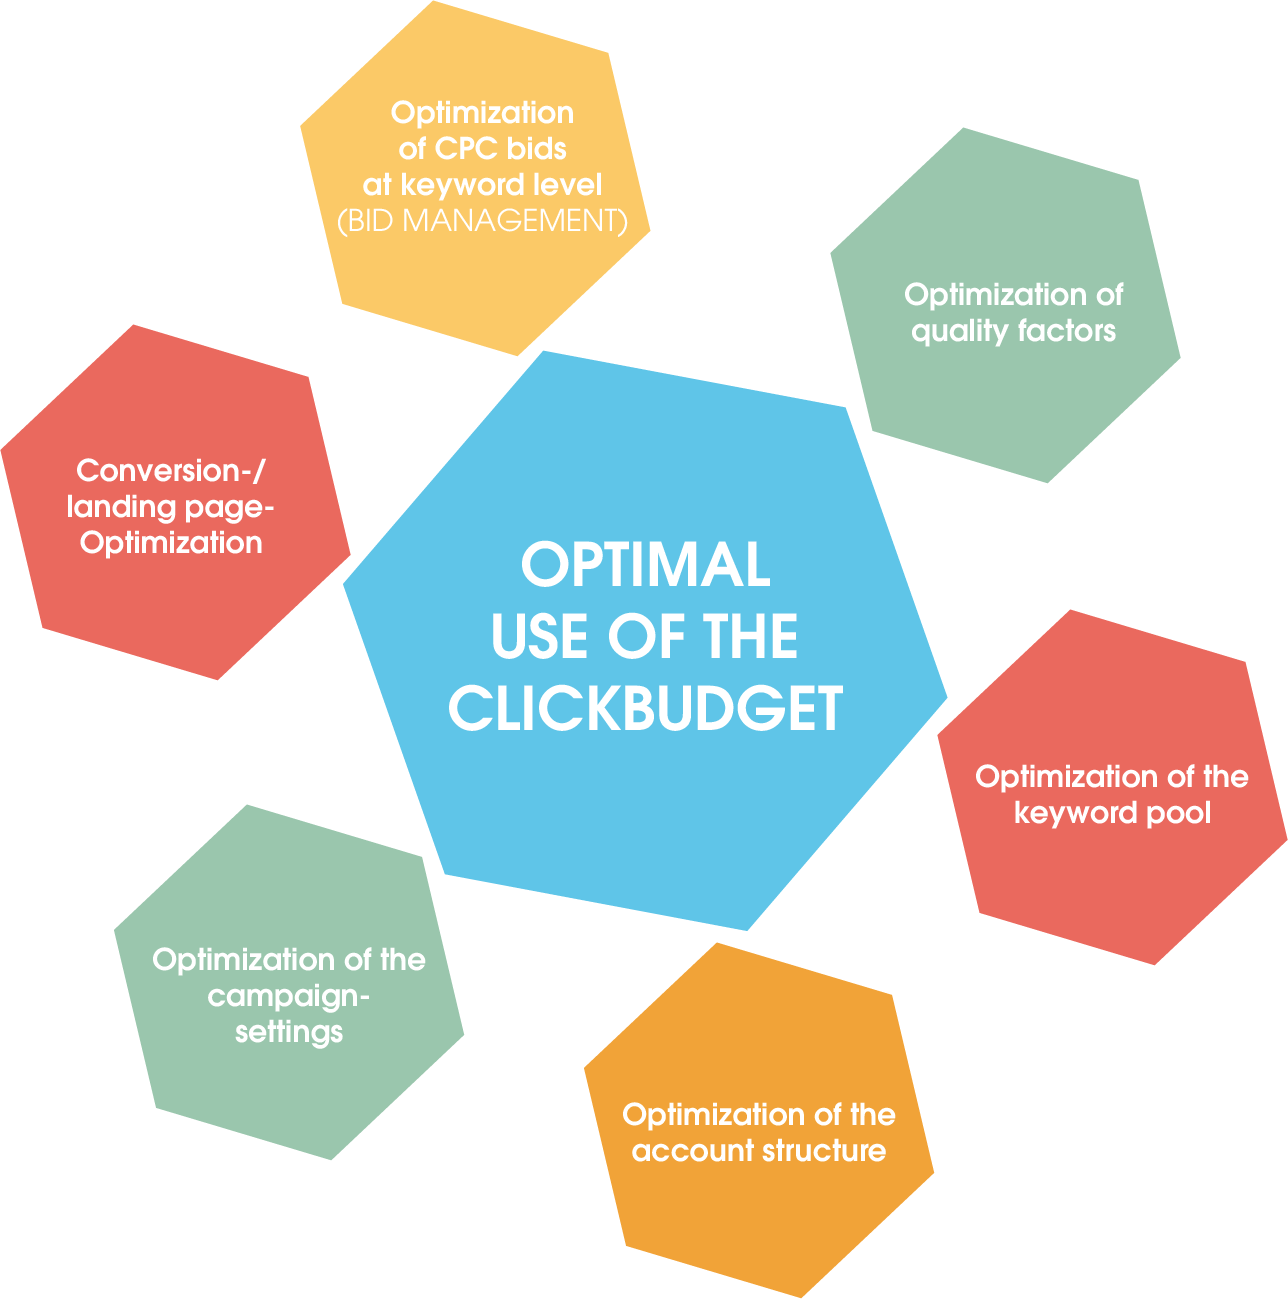 The graphic shows an overview of the areas that should be optimized in a regular cycle to make the best use of the click budget.

1. Optimization of CPC bids at keyword level.
2. Optimization of quality factors
3. Optimization of the keyword pool
4. Optimization of the account structure
5. Optimization of campaign settings
6. Conversion and landing page optimization